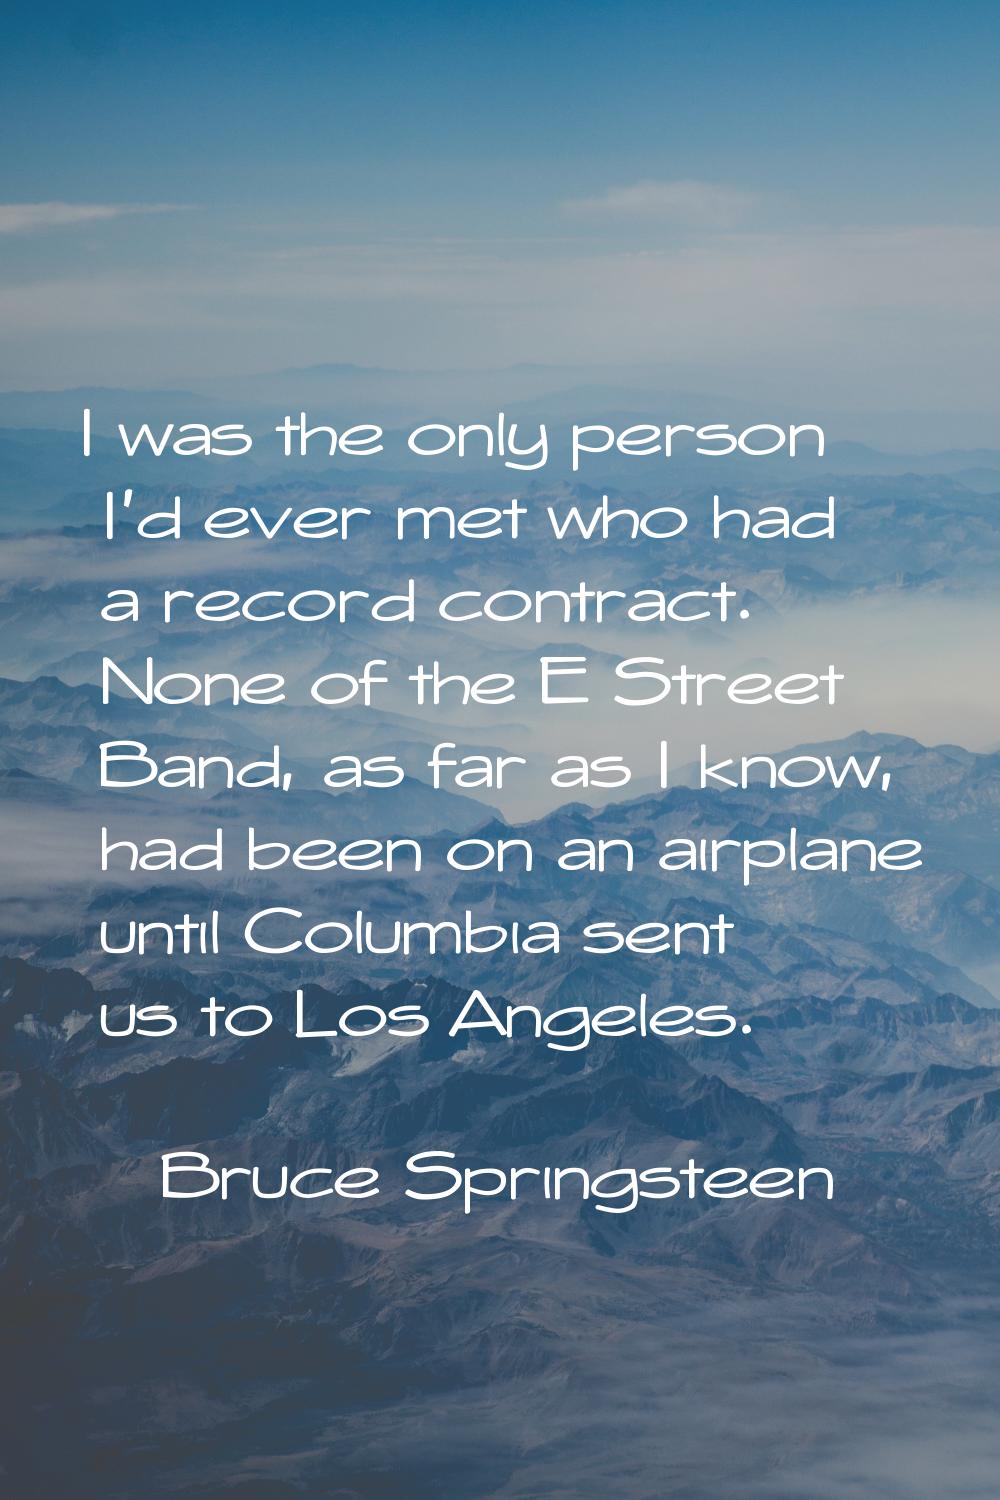 I was the only person I'd ever met who had a record contract. None of the E Street Band, as far as 